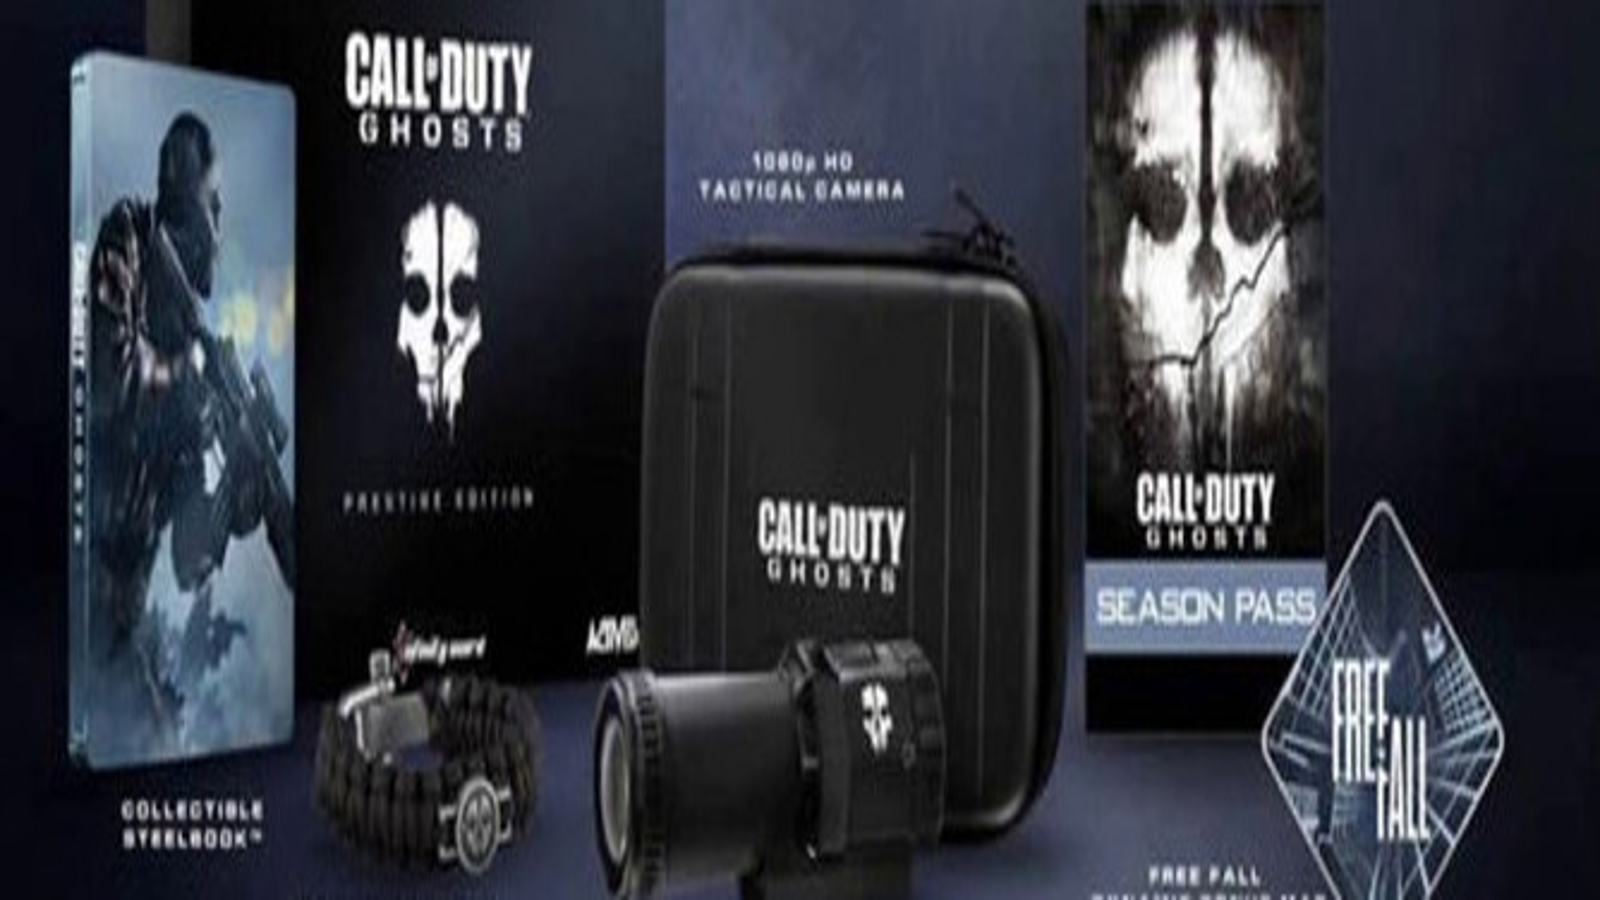 NEW Official Call of Duty Ghosts BLACK Digital Tactical Camera 1080p HD+COD  Case